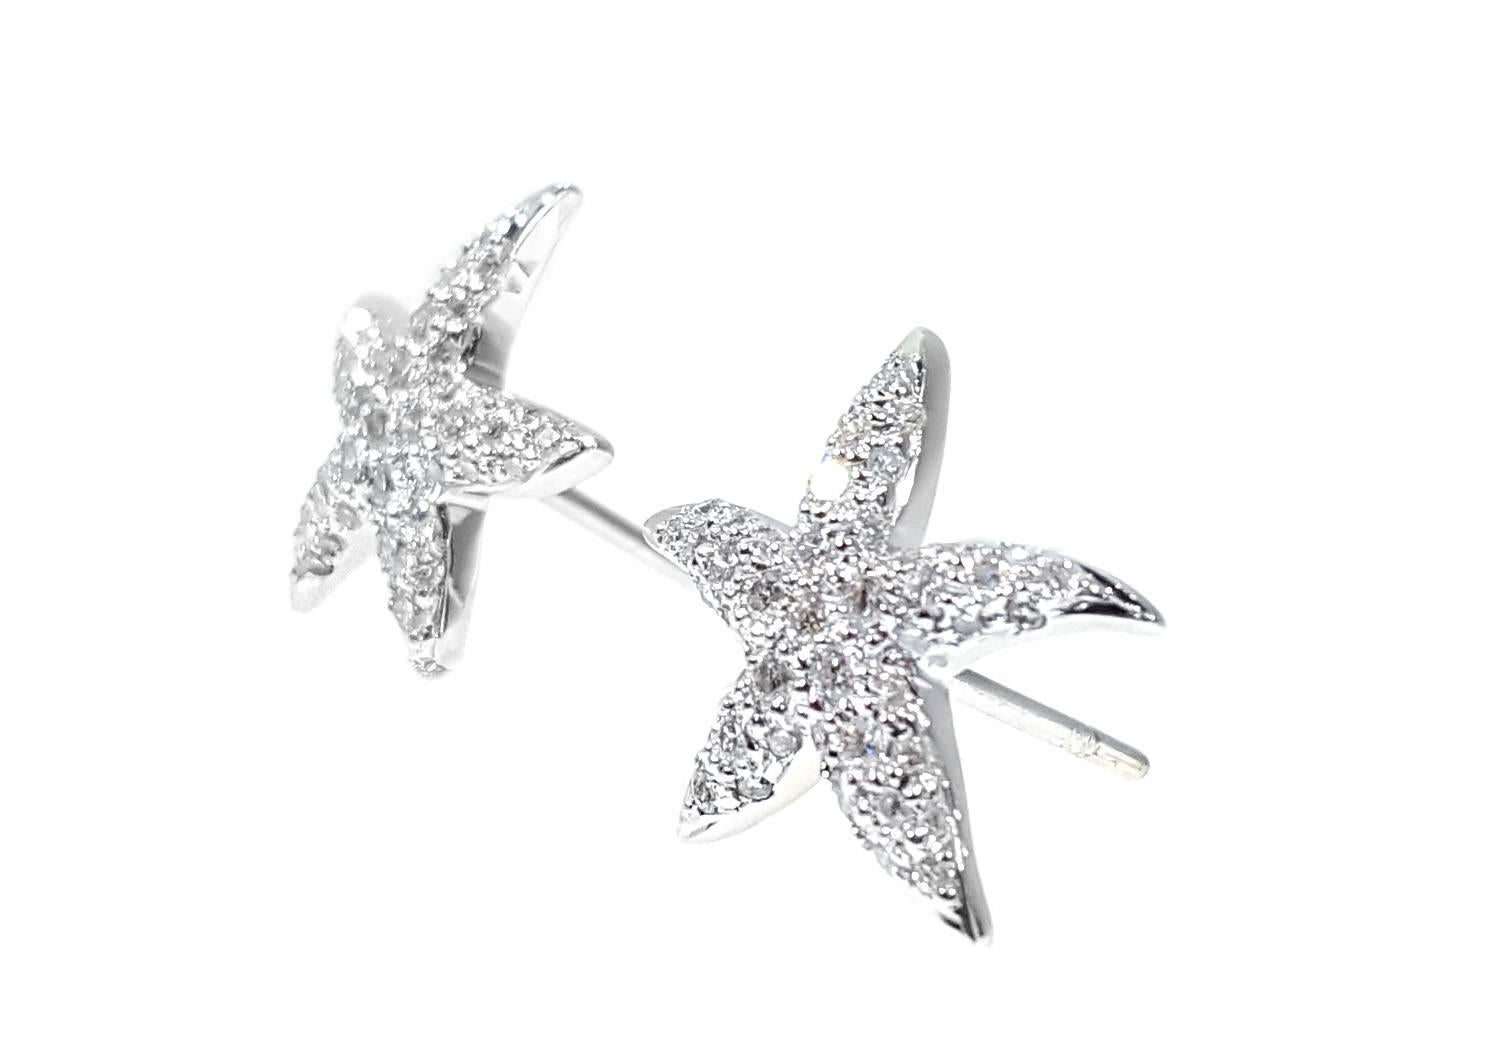 Sparkling starfish earrings with .51ctw of full cut round brilliant diamonds pave set in high polished 18kt white gold. Earrings measure approximately 5/8